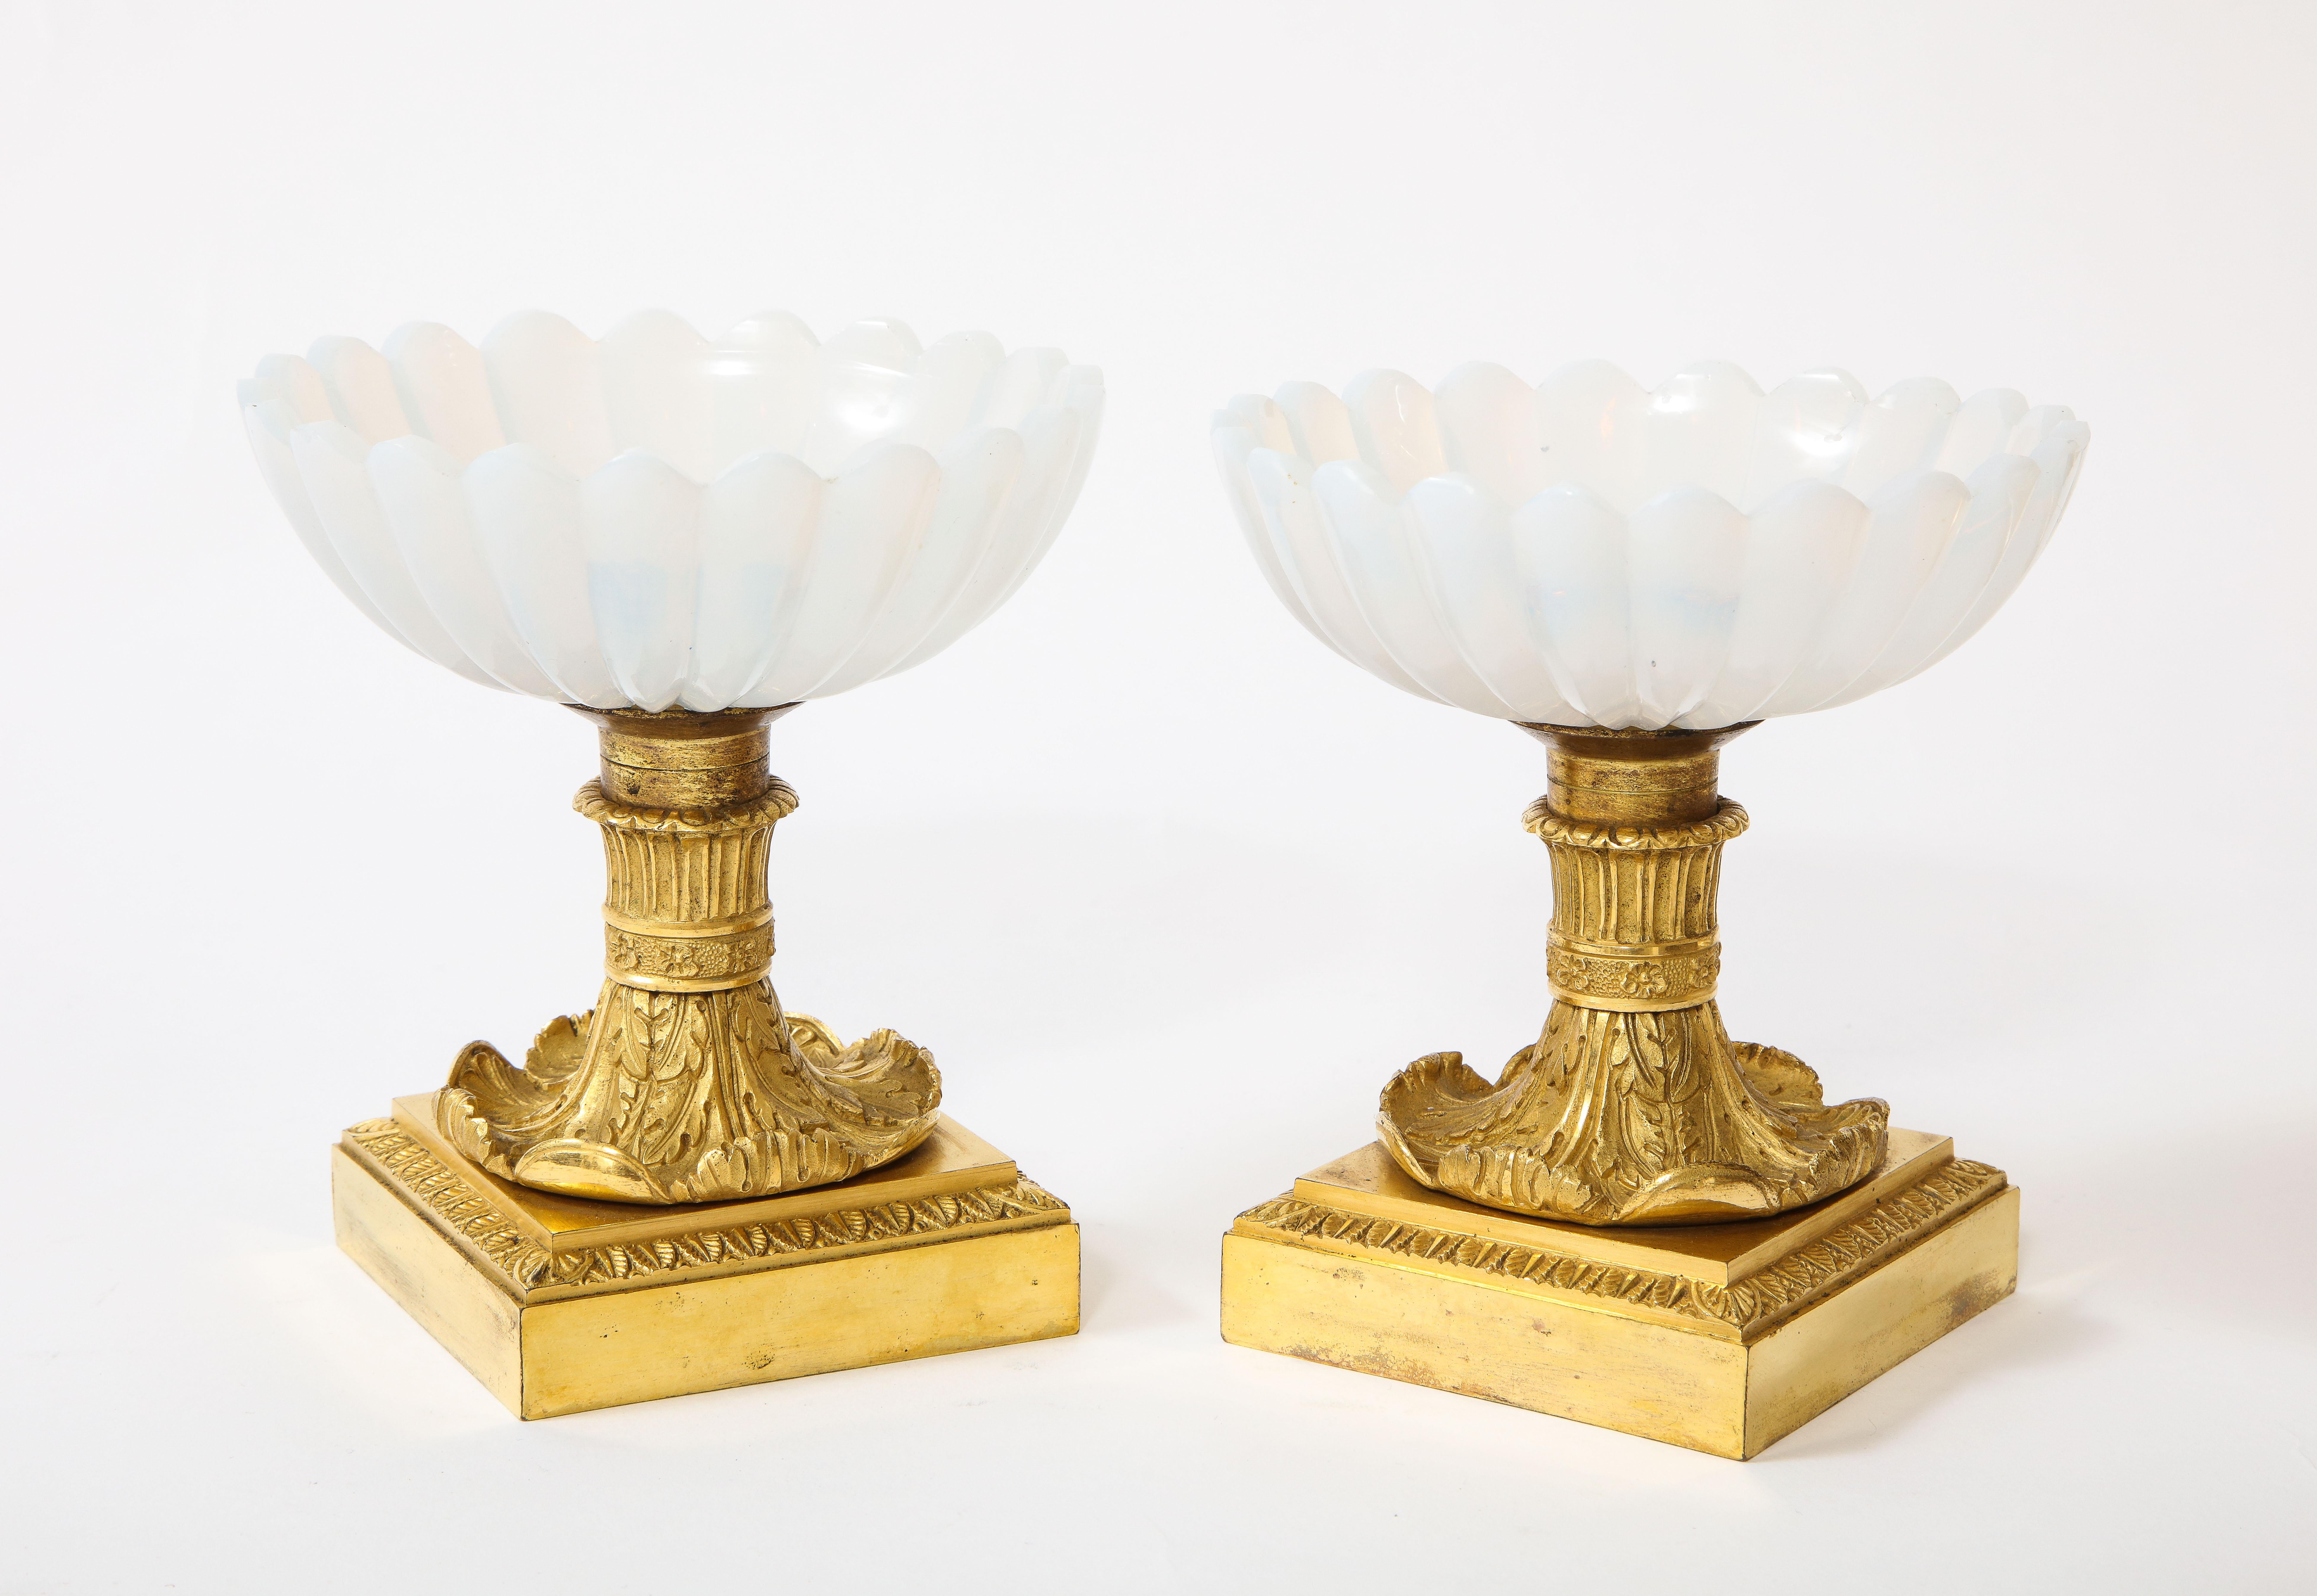 A beautiful pair of Russian Empire Imperial Glass Manufactury and ormolu mounted white opalescent tazza centrepieces, each white opaline bowl beautifully hand cut and hand polished in flutted design with ribbed border; the Ormolu very finely hand